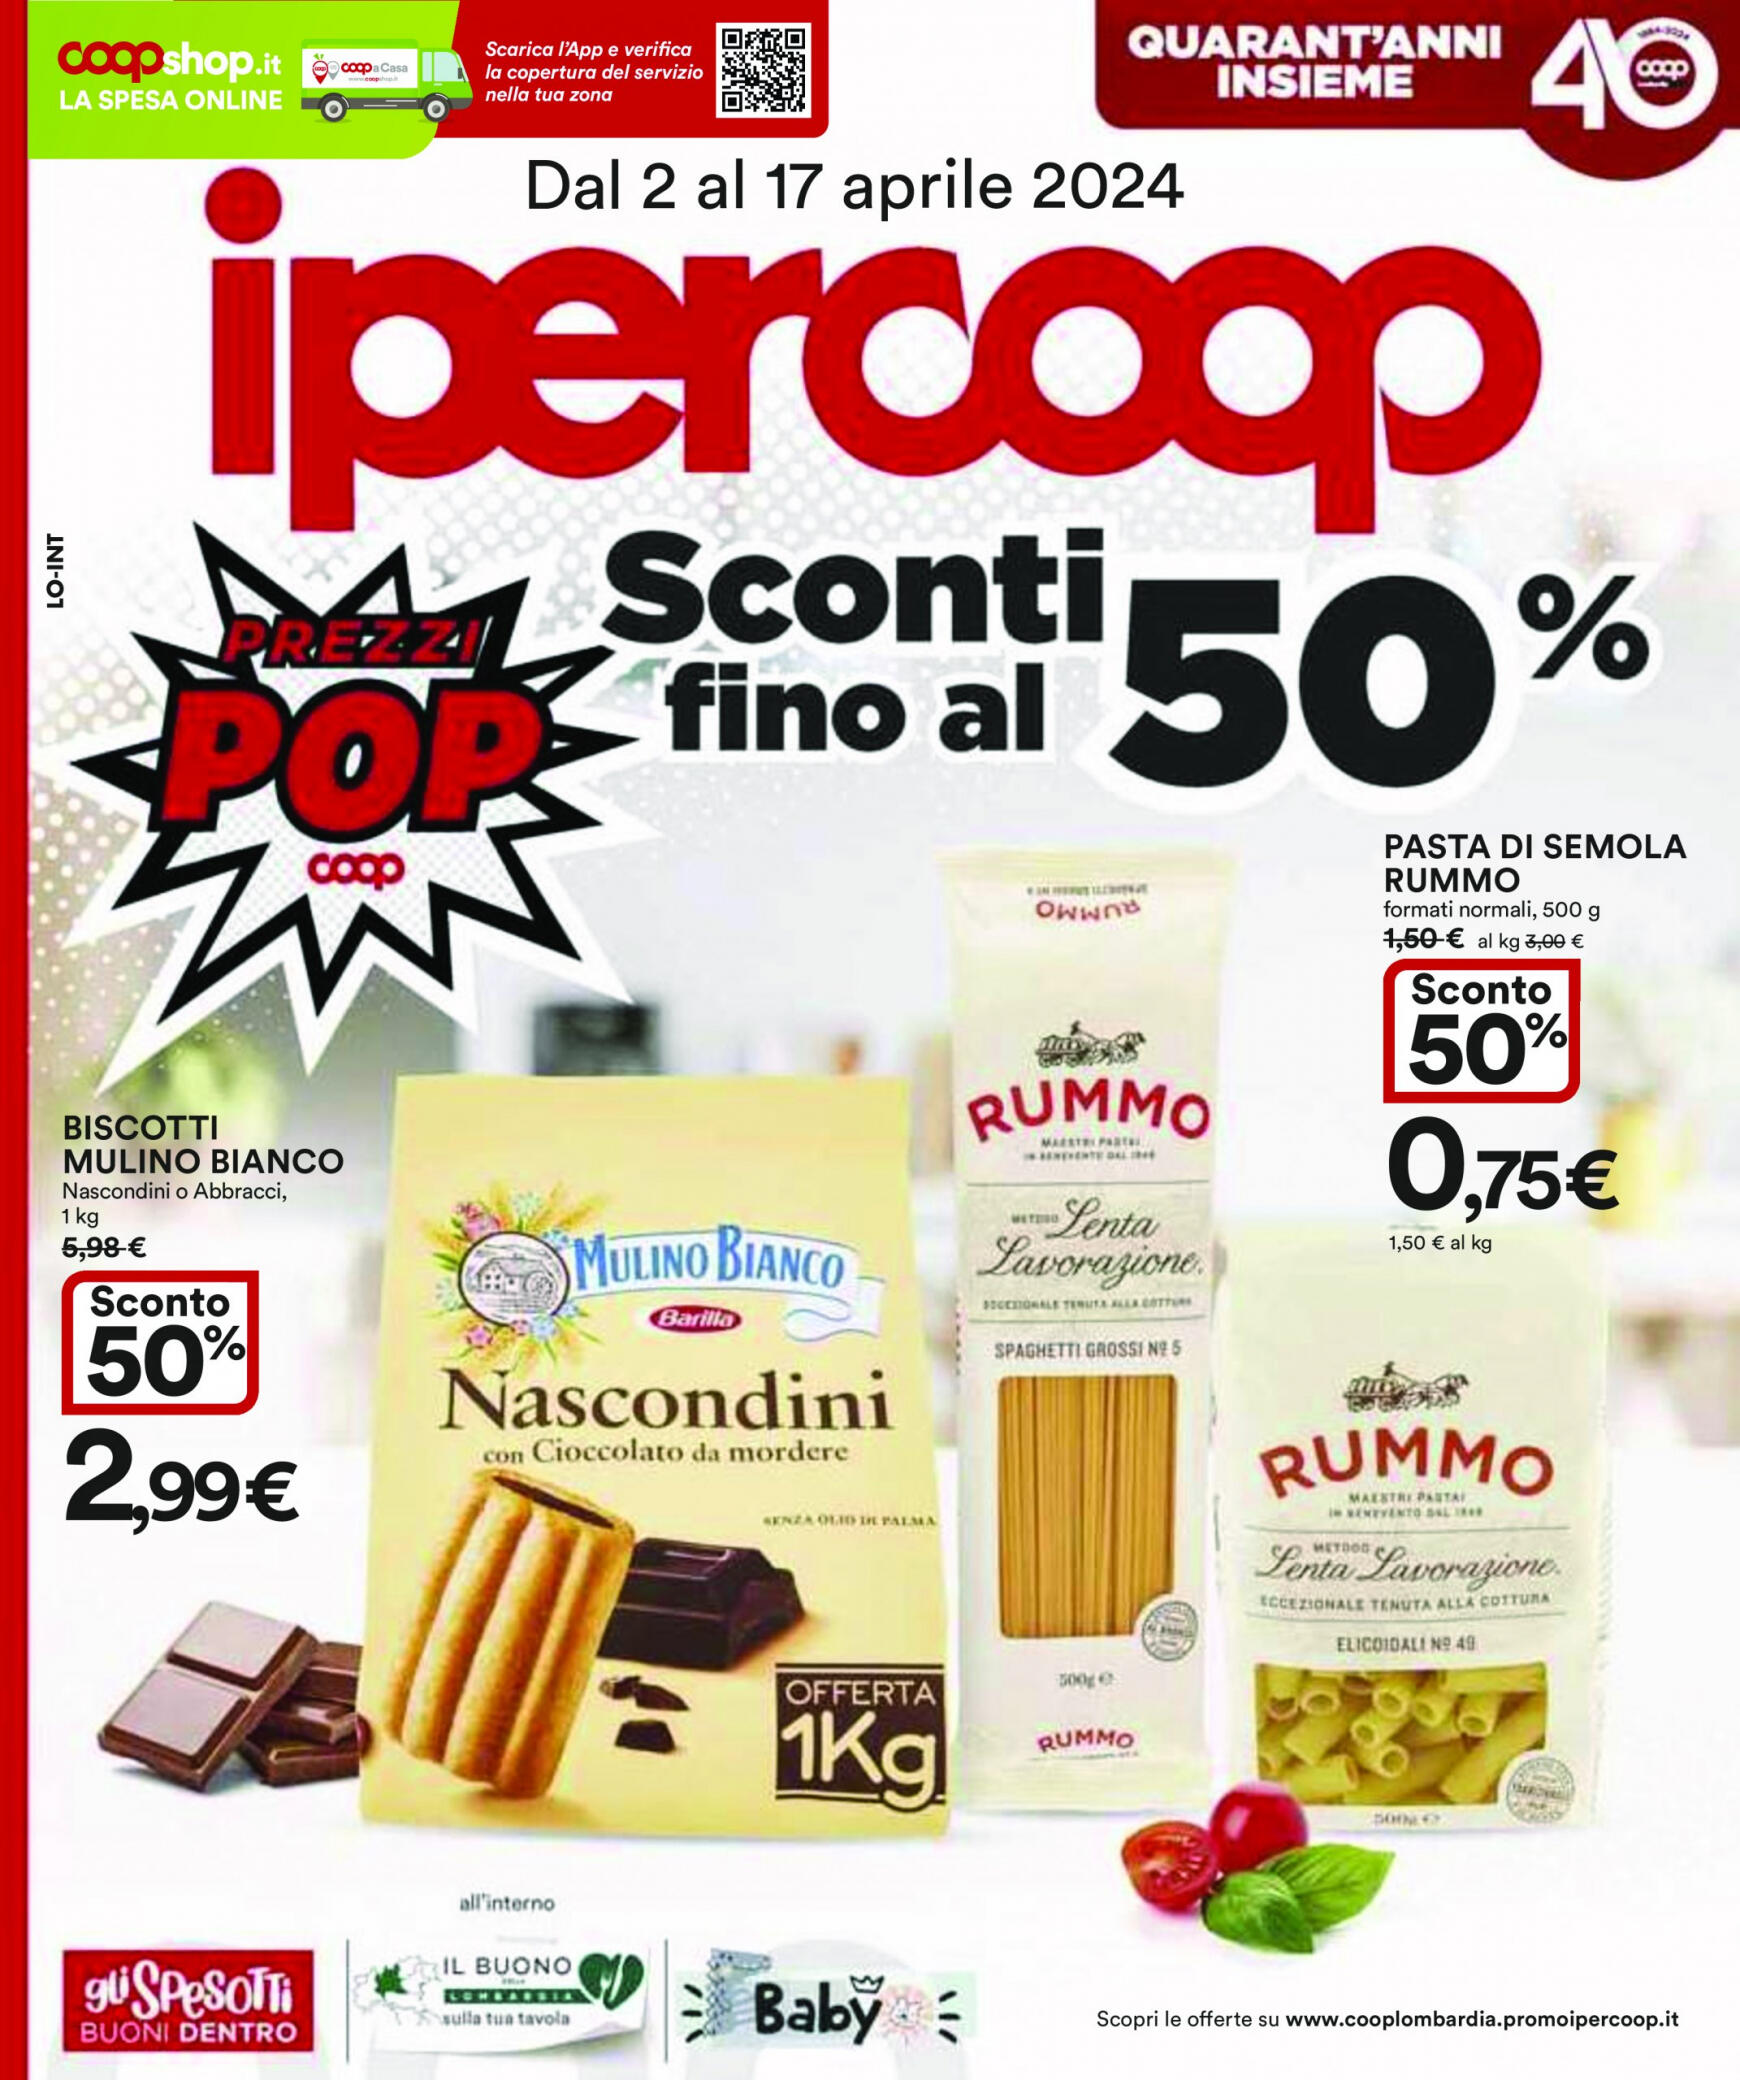 coop - Nuovo volantino Coop 02.04. - 17.04. - page: 1